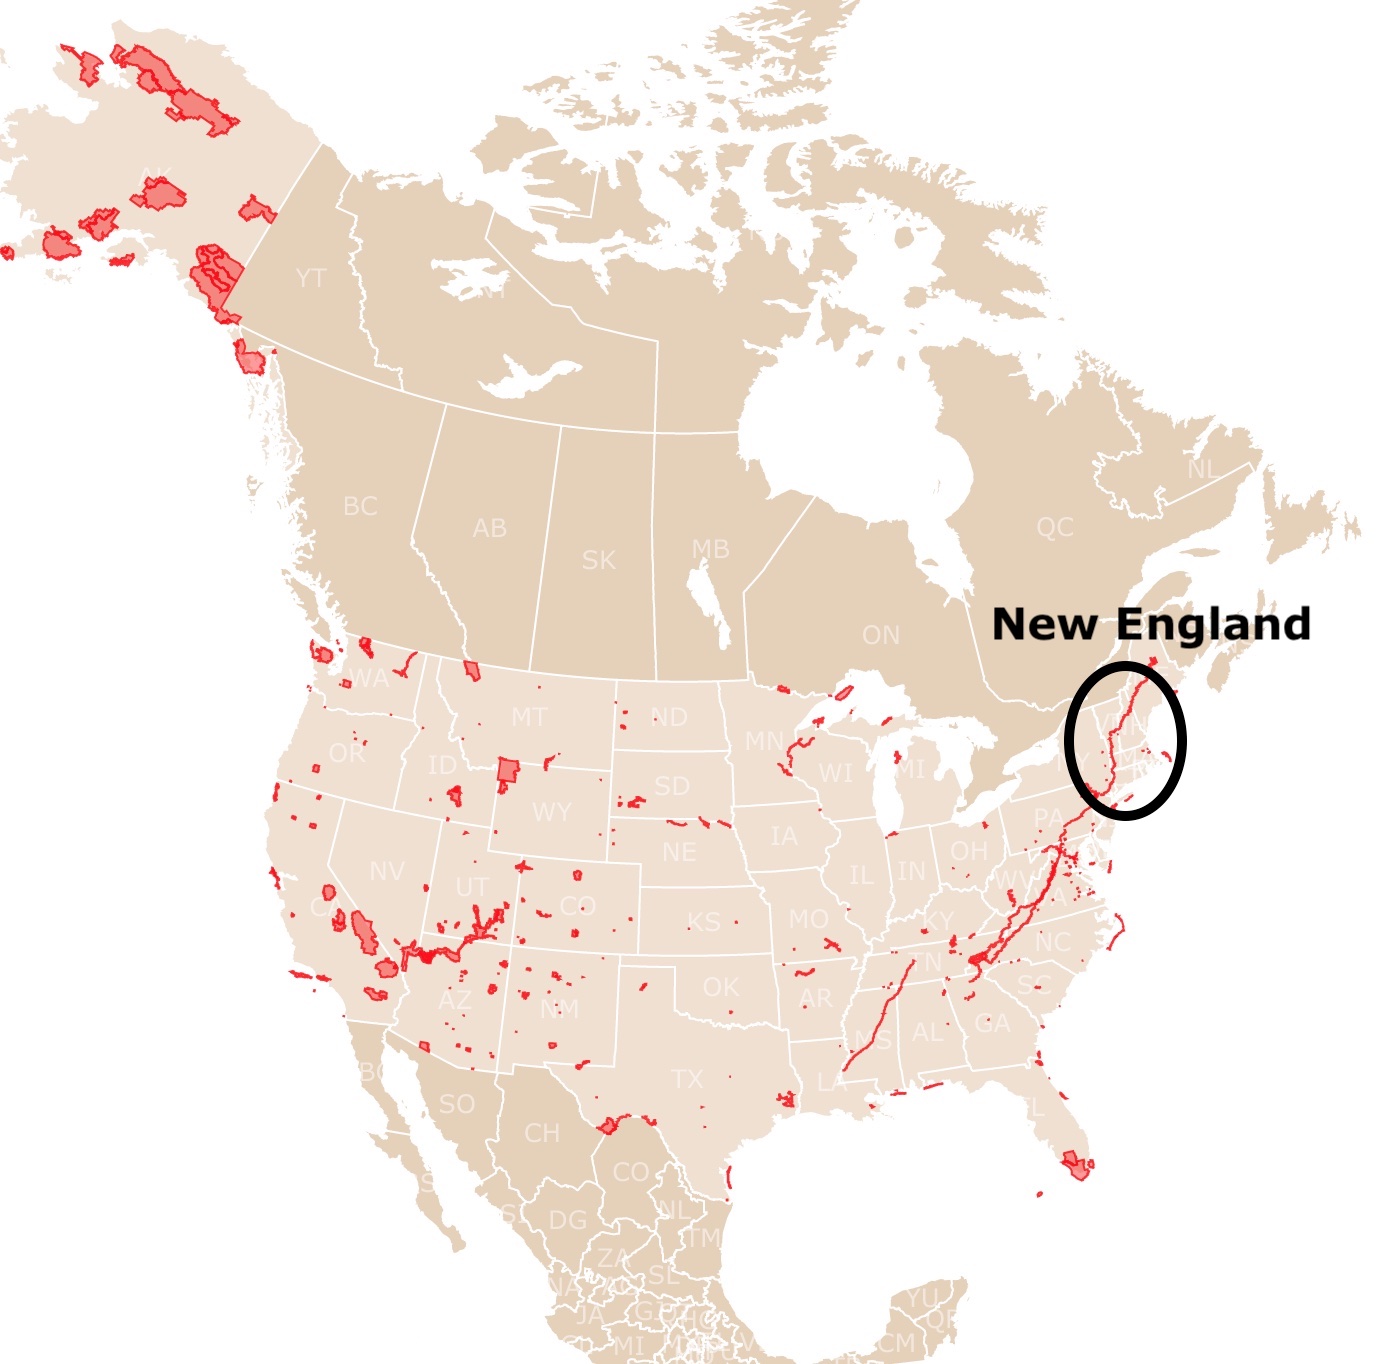 New England location in Northamerica